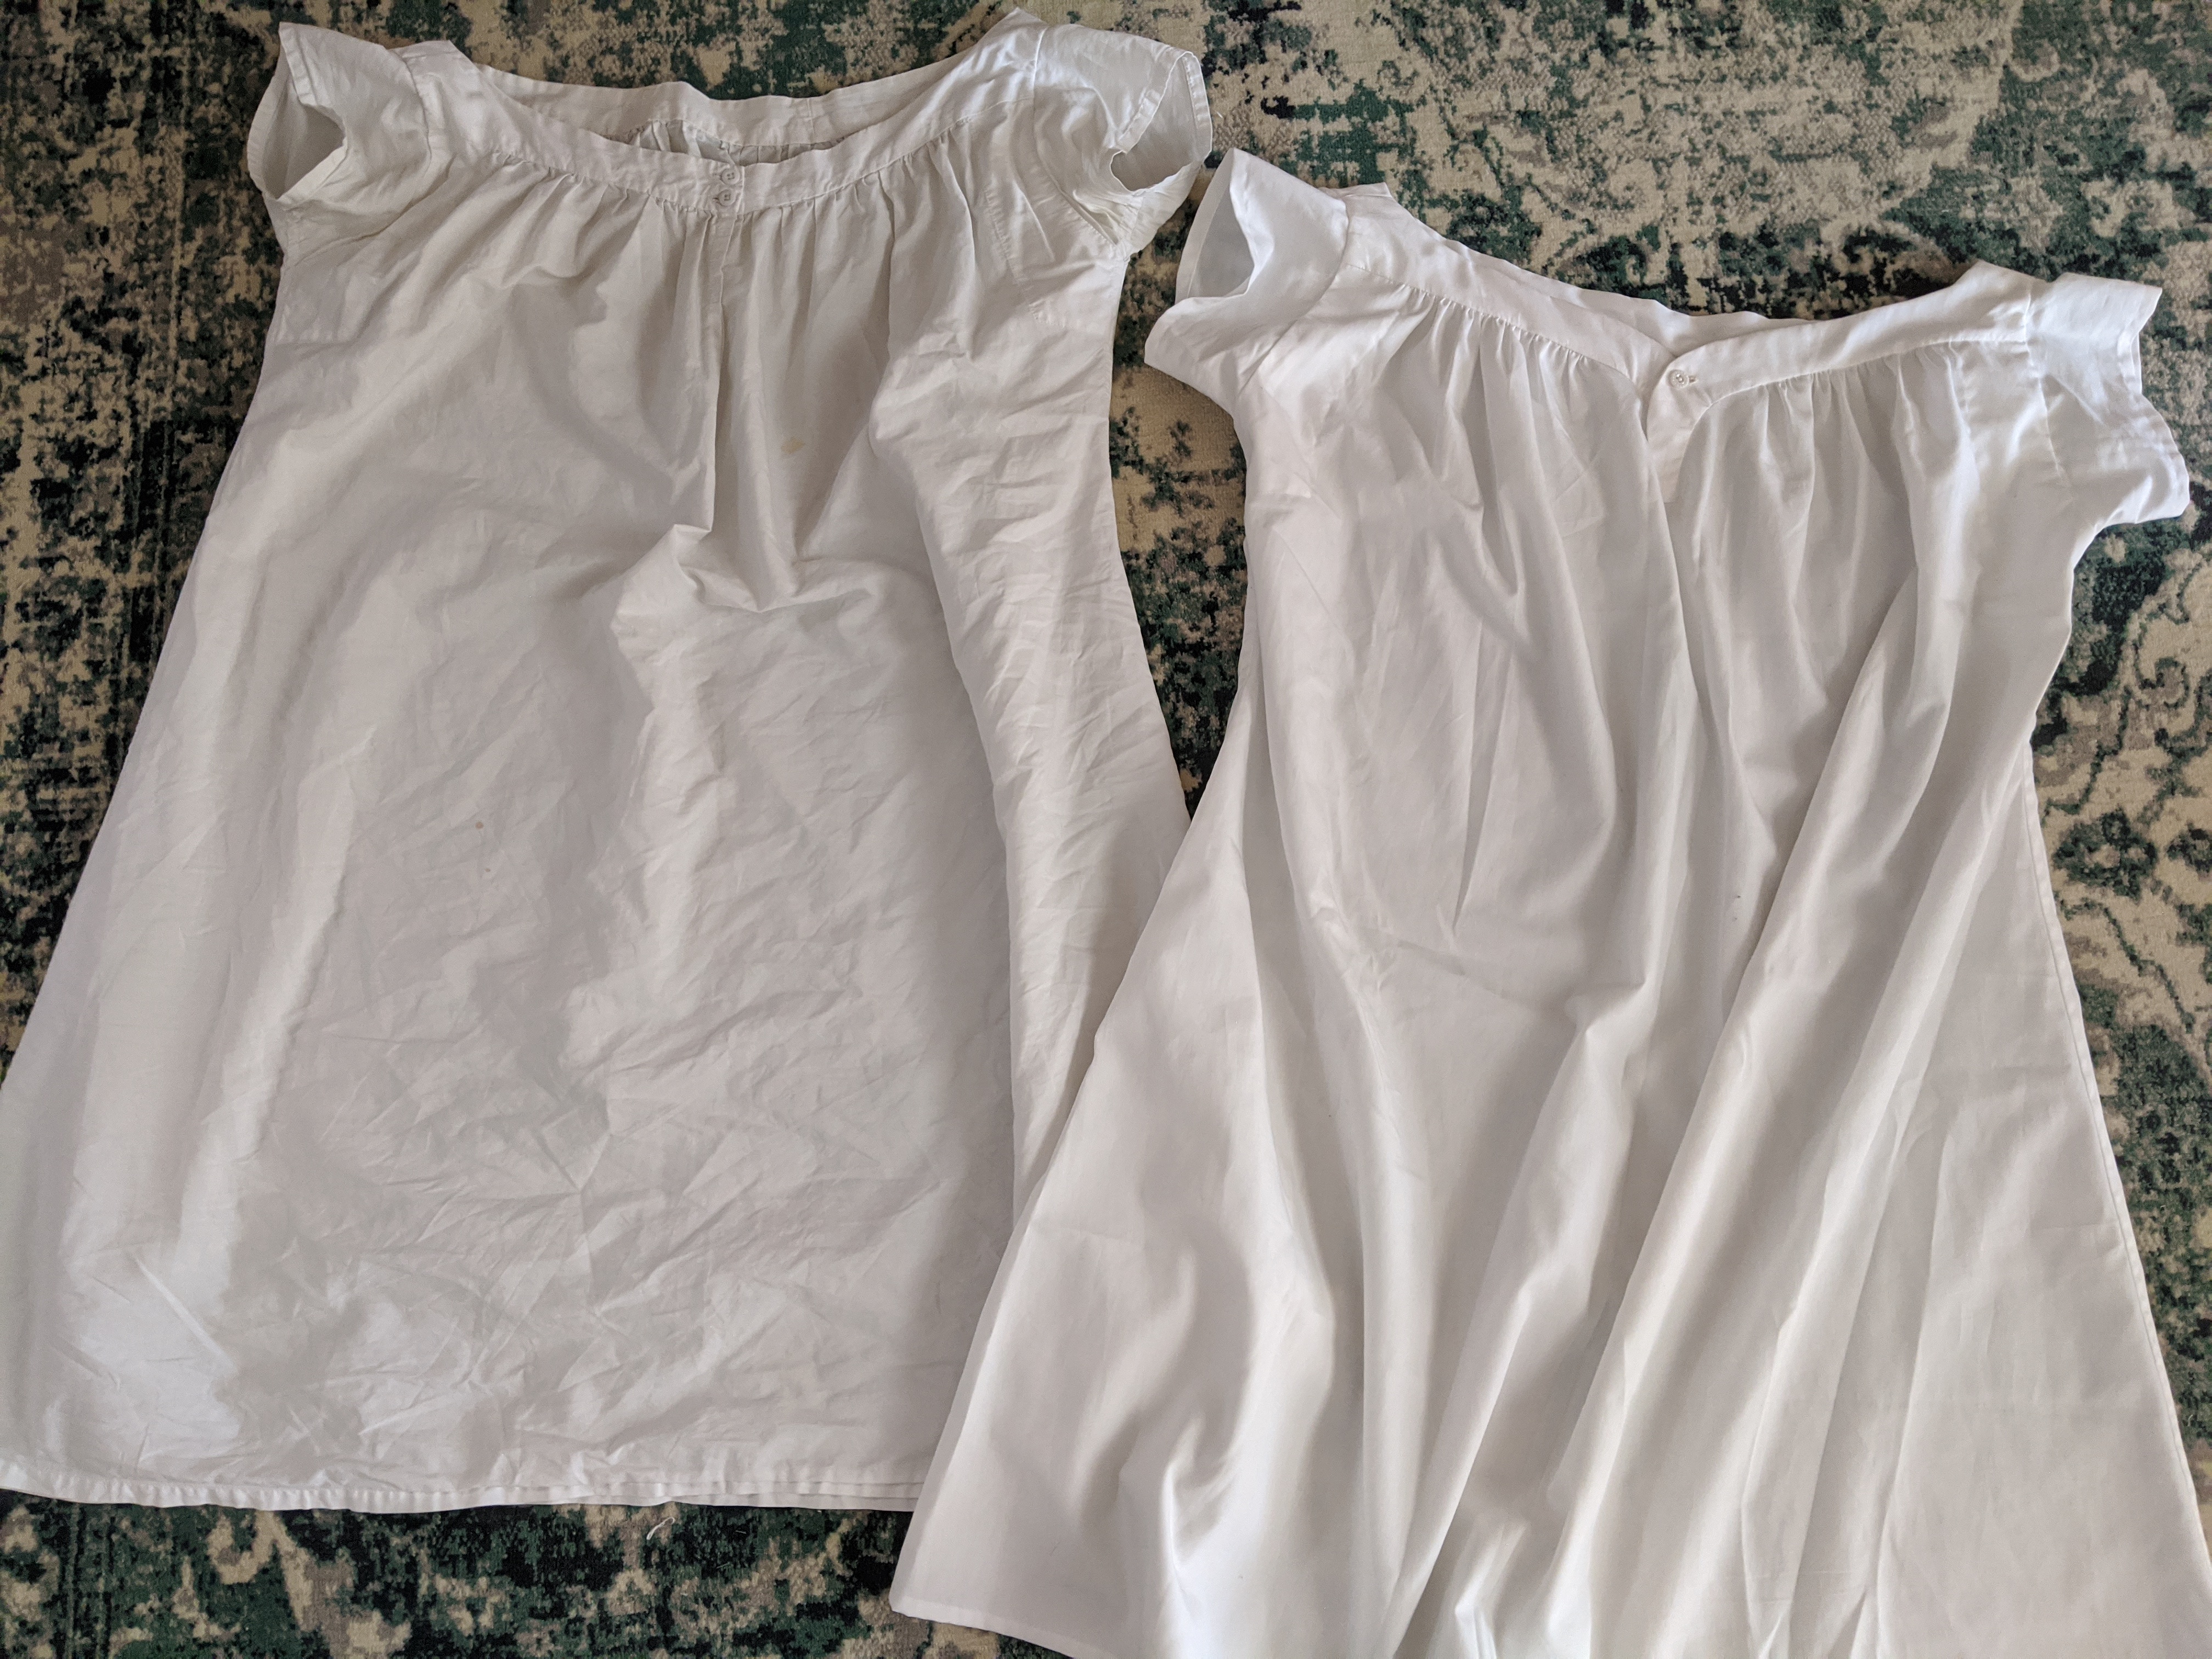 Making 1860's Chemise, Corset, & Drawers - Simplicity 2890 Review